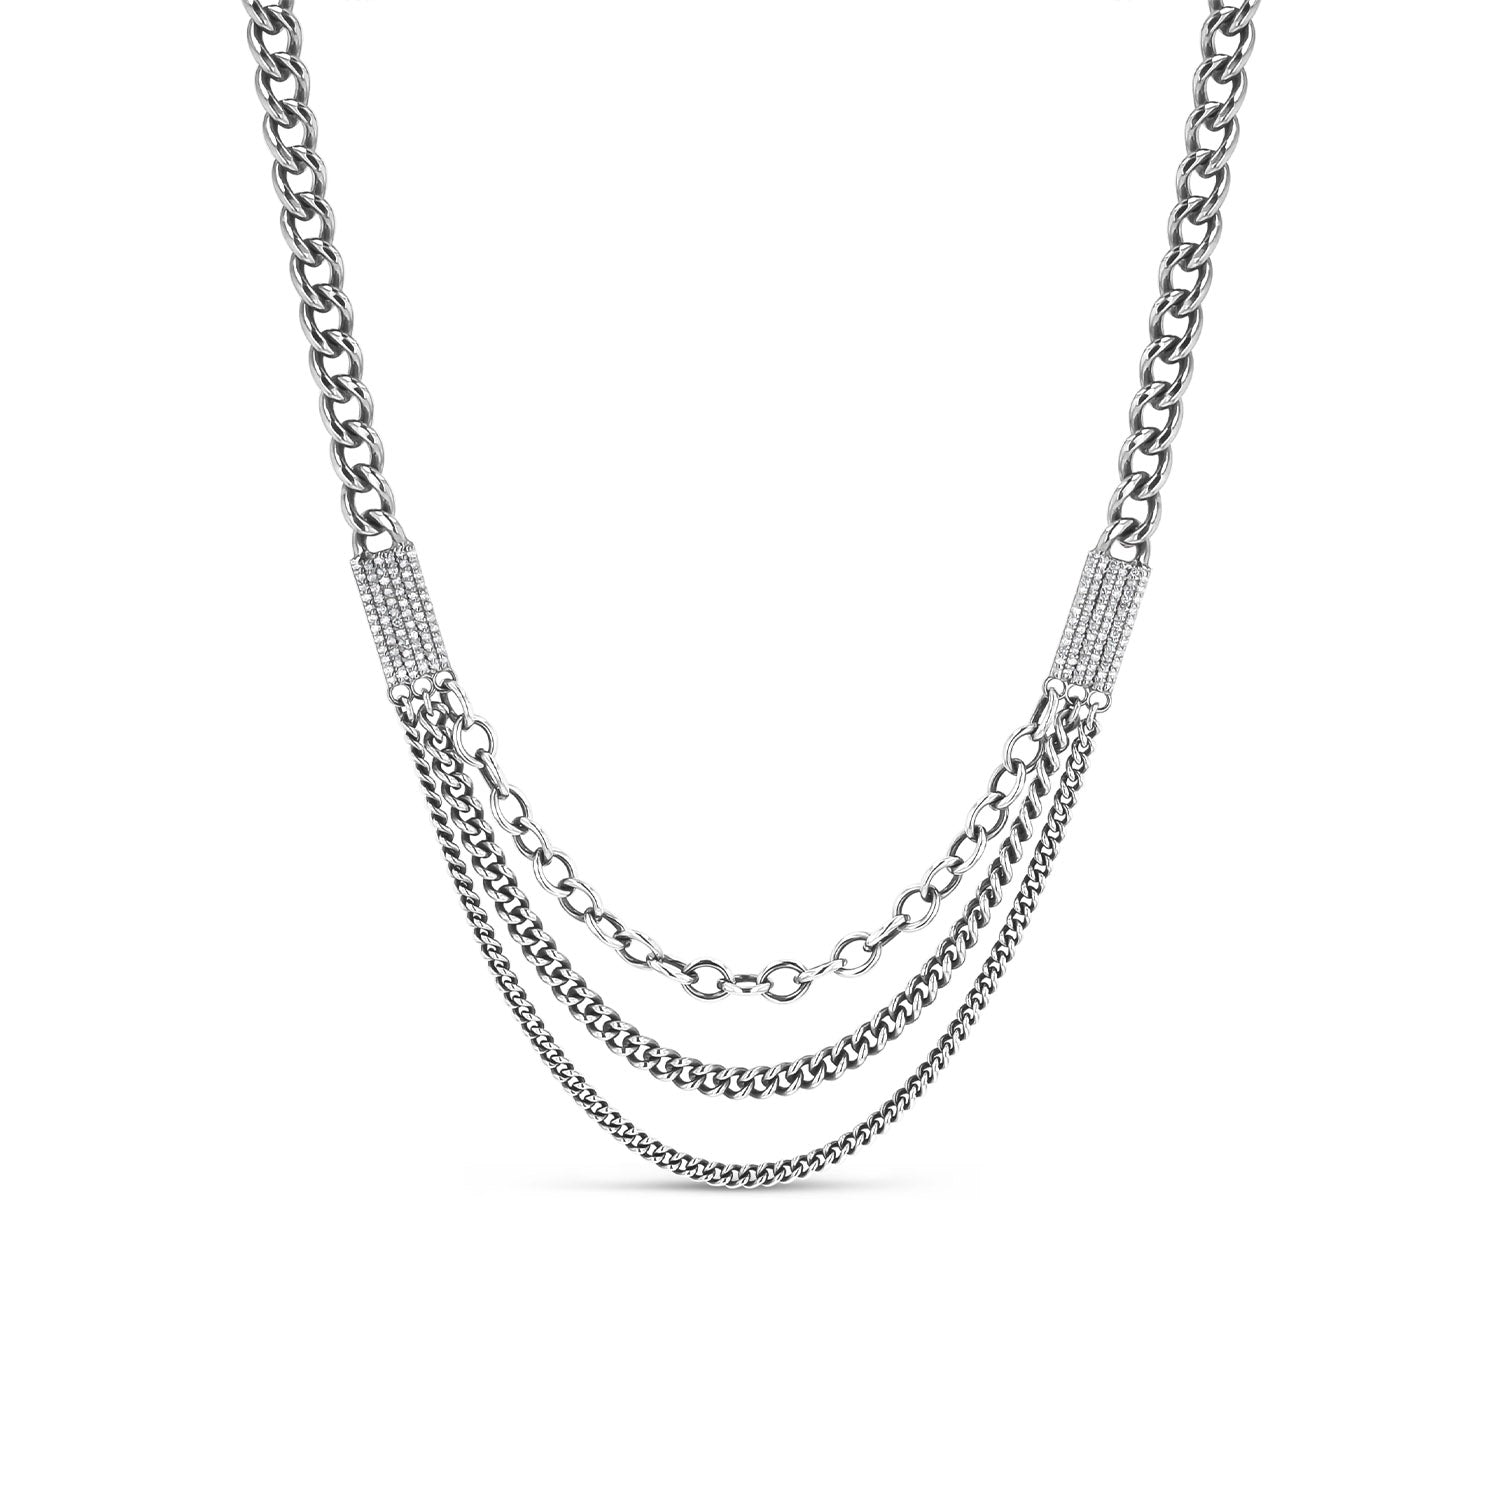 Multi Chain Sterling Silver Necklace with Diamond Stations-18"  N0003003 - TBird